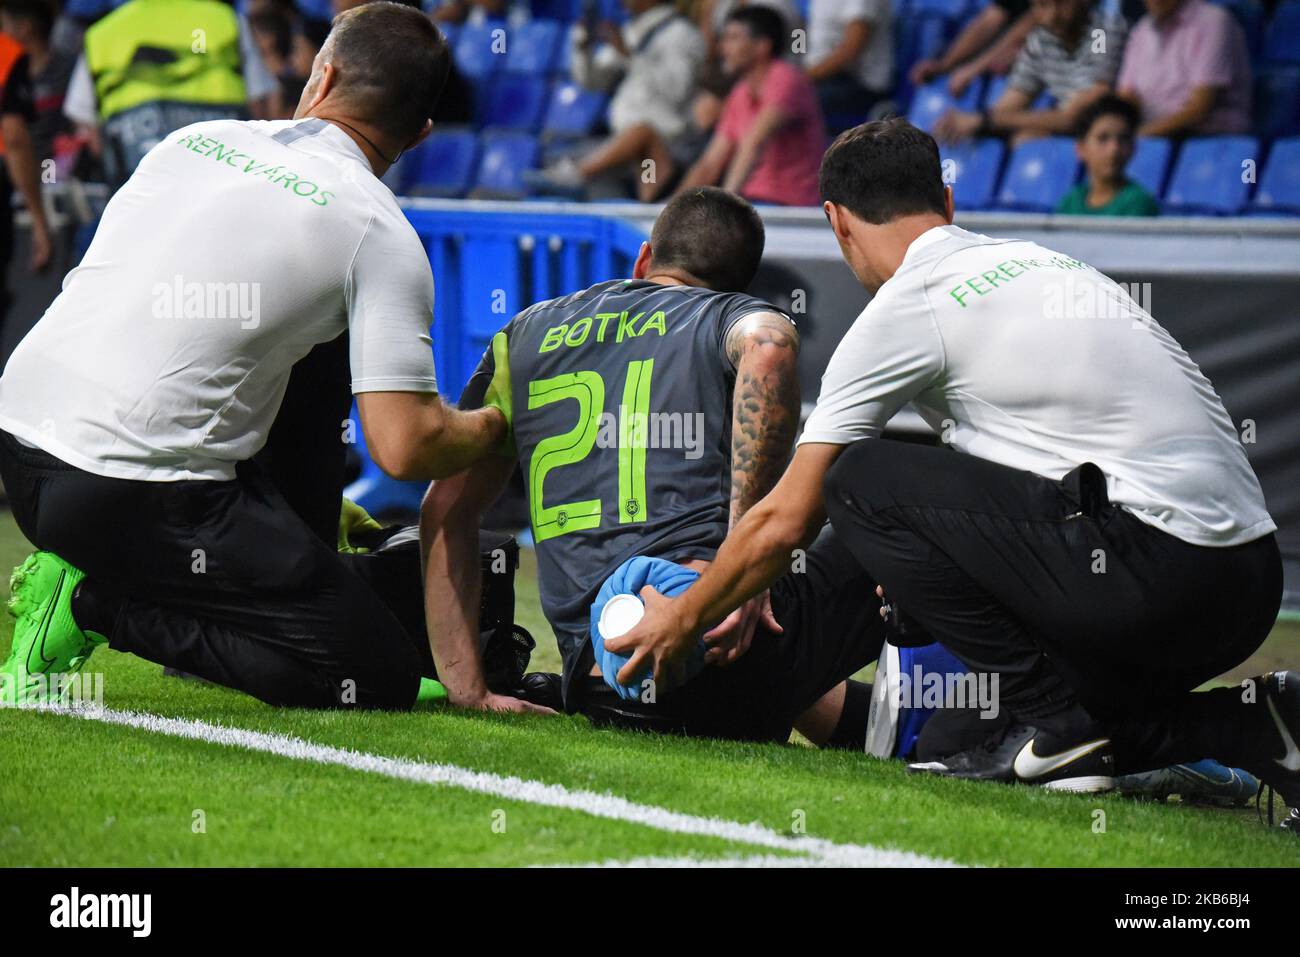 Endre Botka during the match between RCD Espanyol and Ferencvaros, corresponding to the round 1 of the group stage of the Group H of the UEFA Europa League, played at the RCDESPANYOL Stadium, on 20th September 2019, in Barcelona, Spain. (Photo by Noelia Deniz/Urbanandsport /NurPhoto) Stock Photo